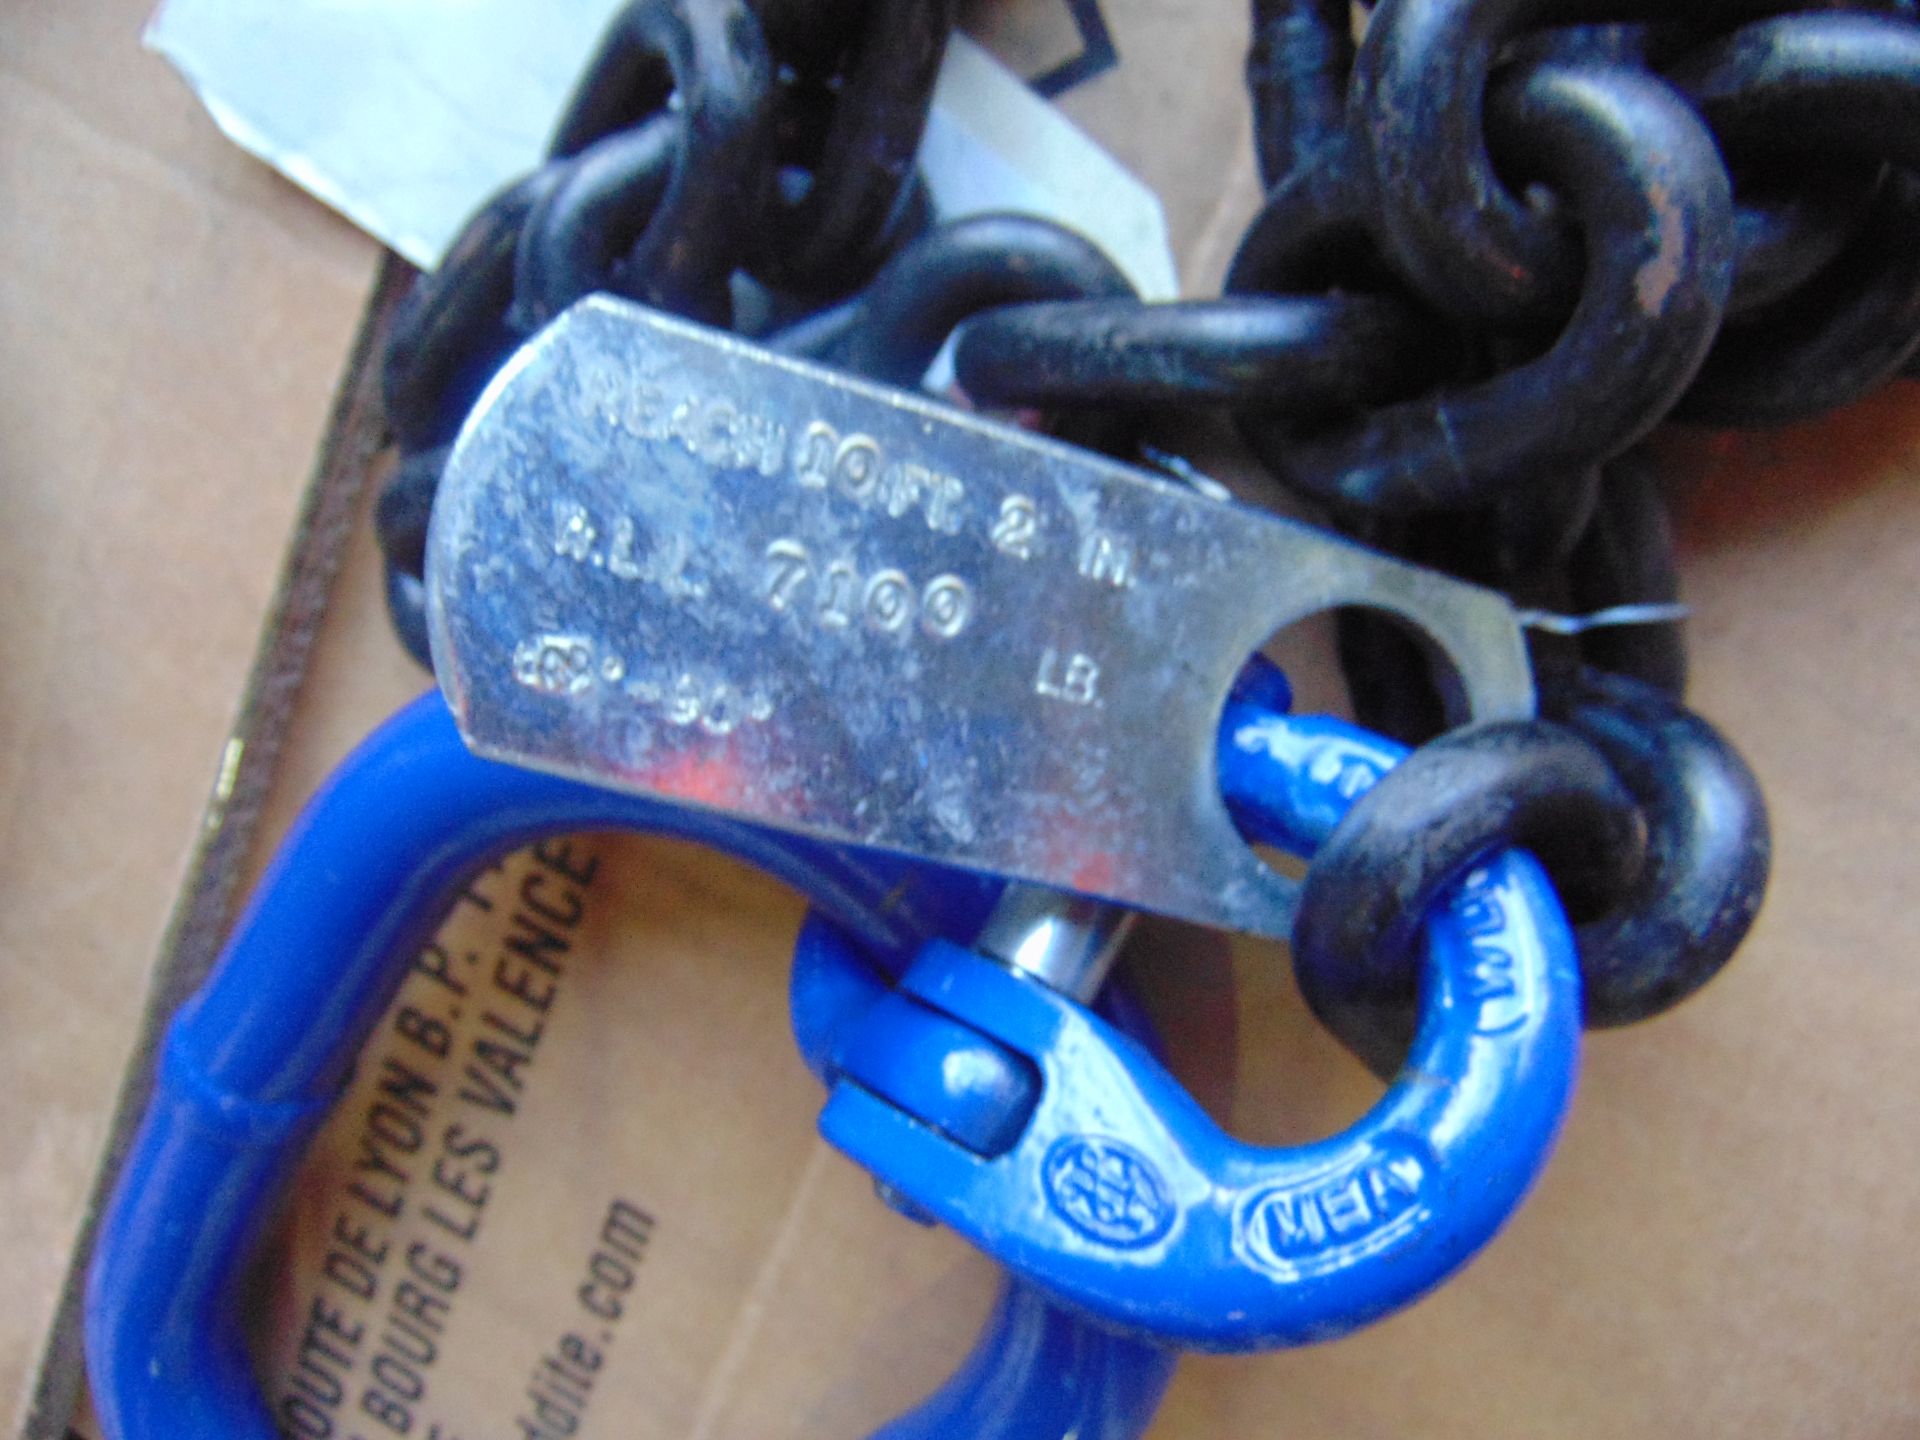 4x New Unissued 10ft Lifting Chains c/w Labels - Image 6 of 7